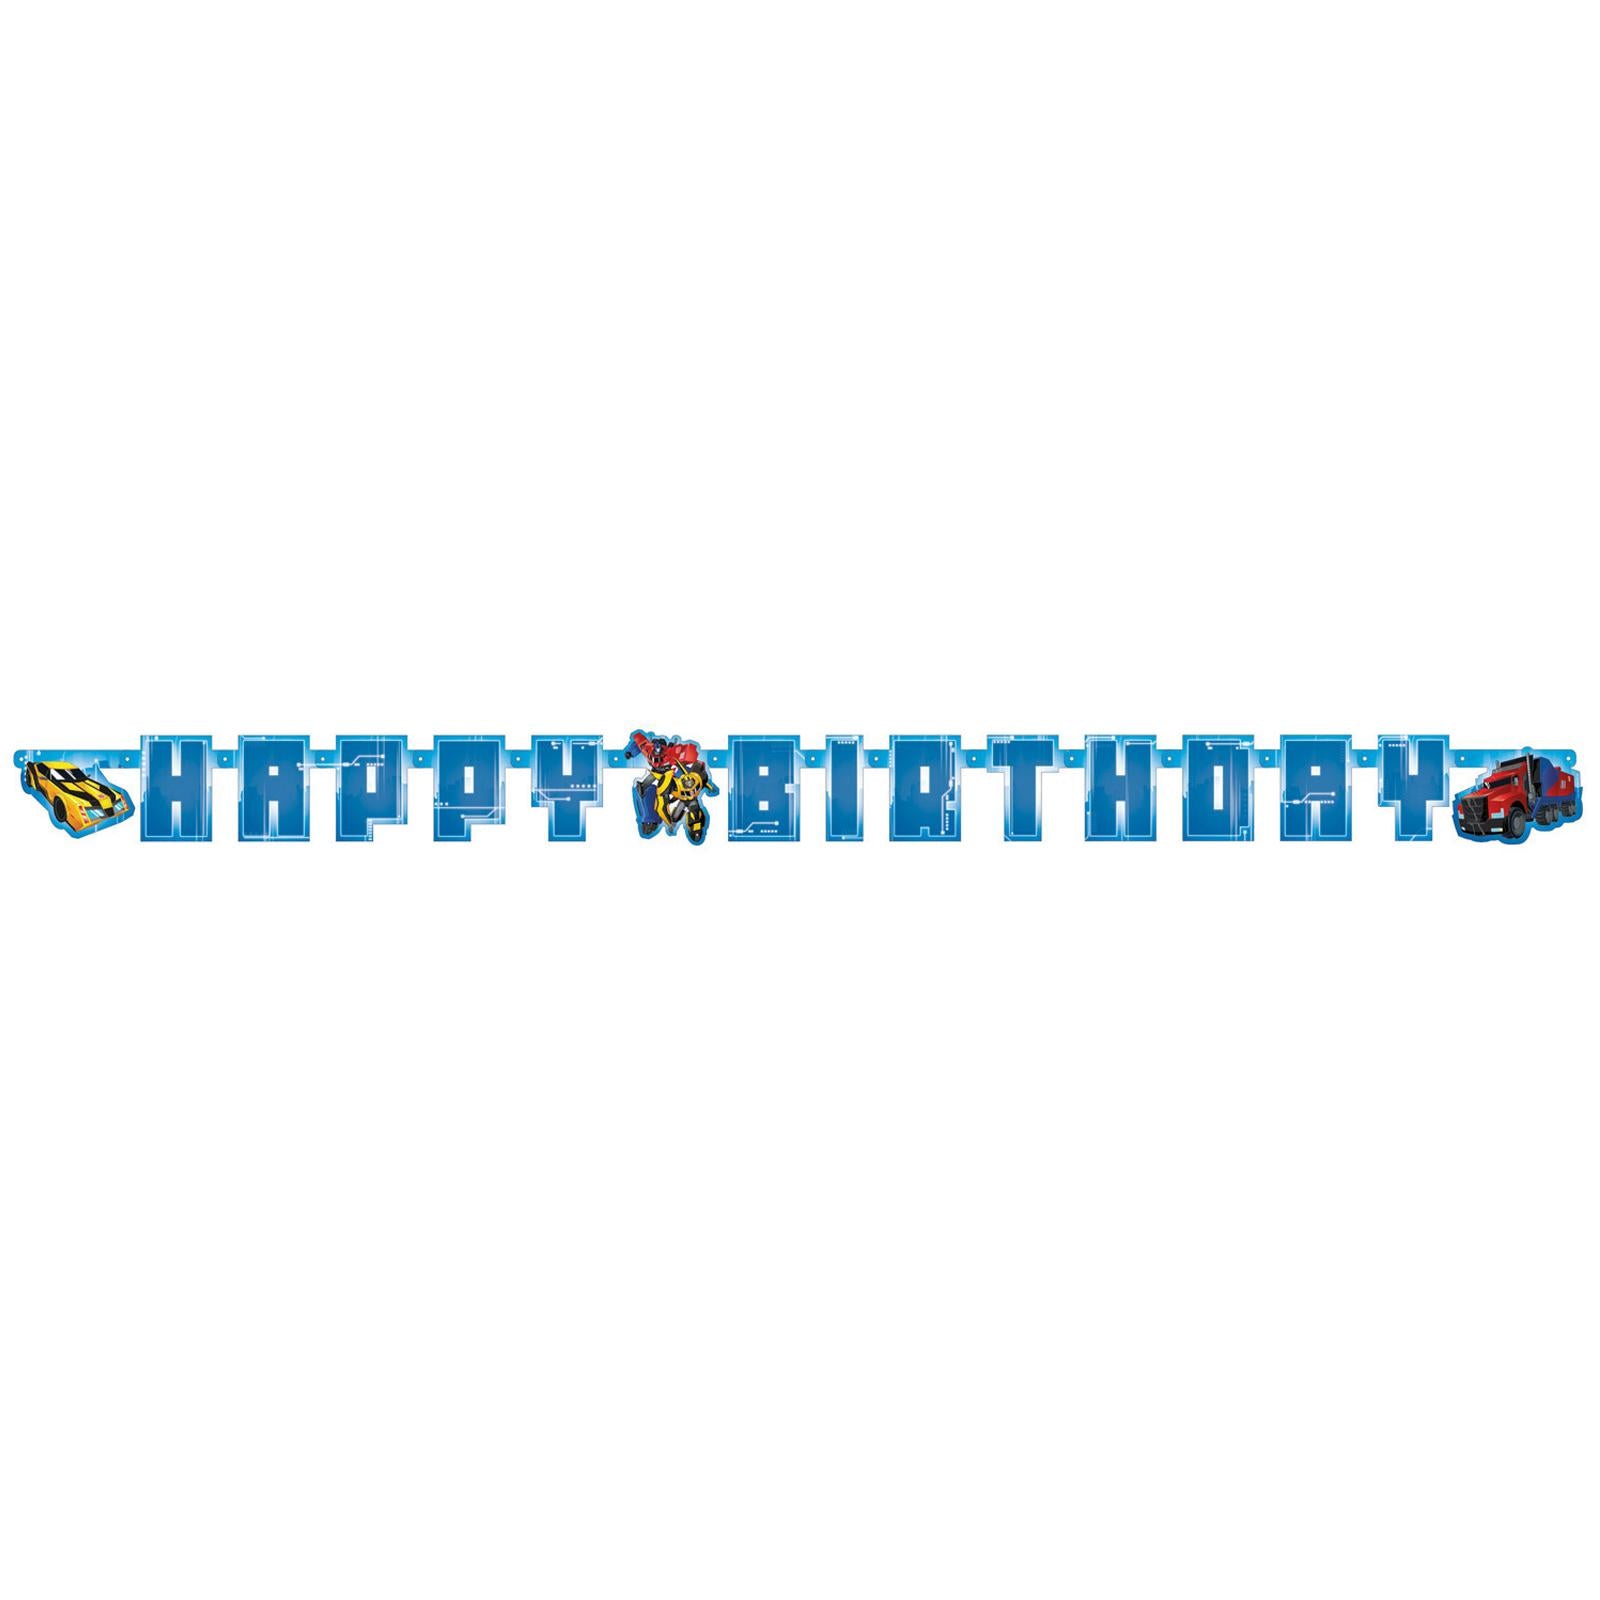 Transformer RID Letter Banner Decorations - Party Centre